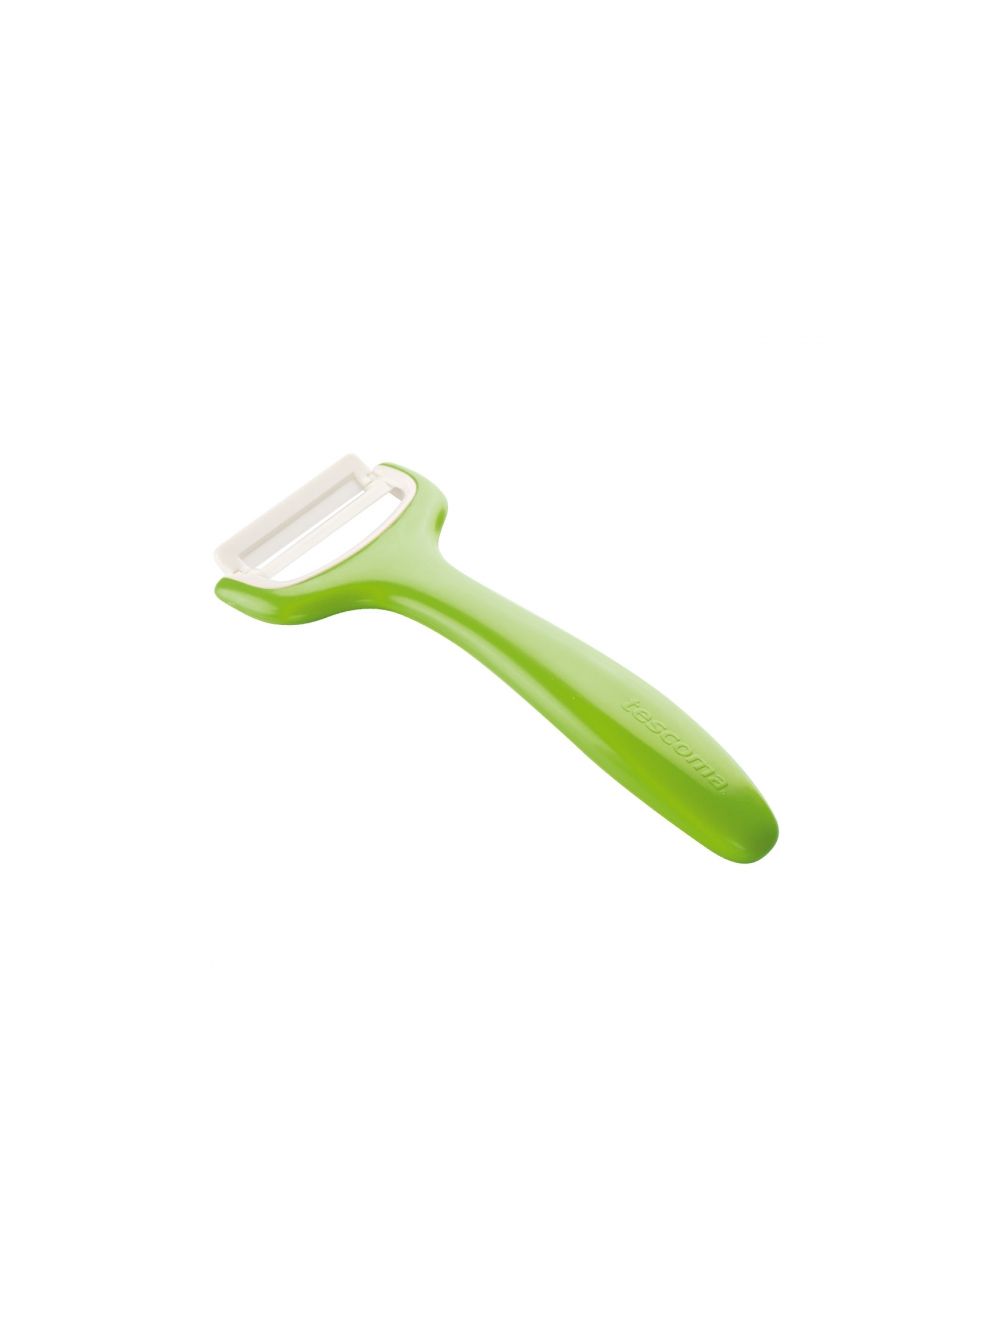 Ceramic Peeler With Lateral Blade - Assorted Colour